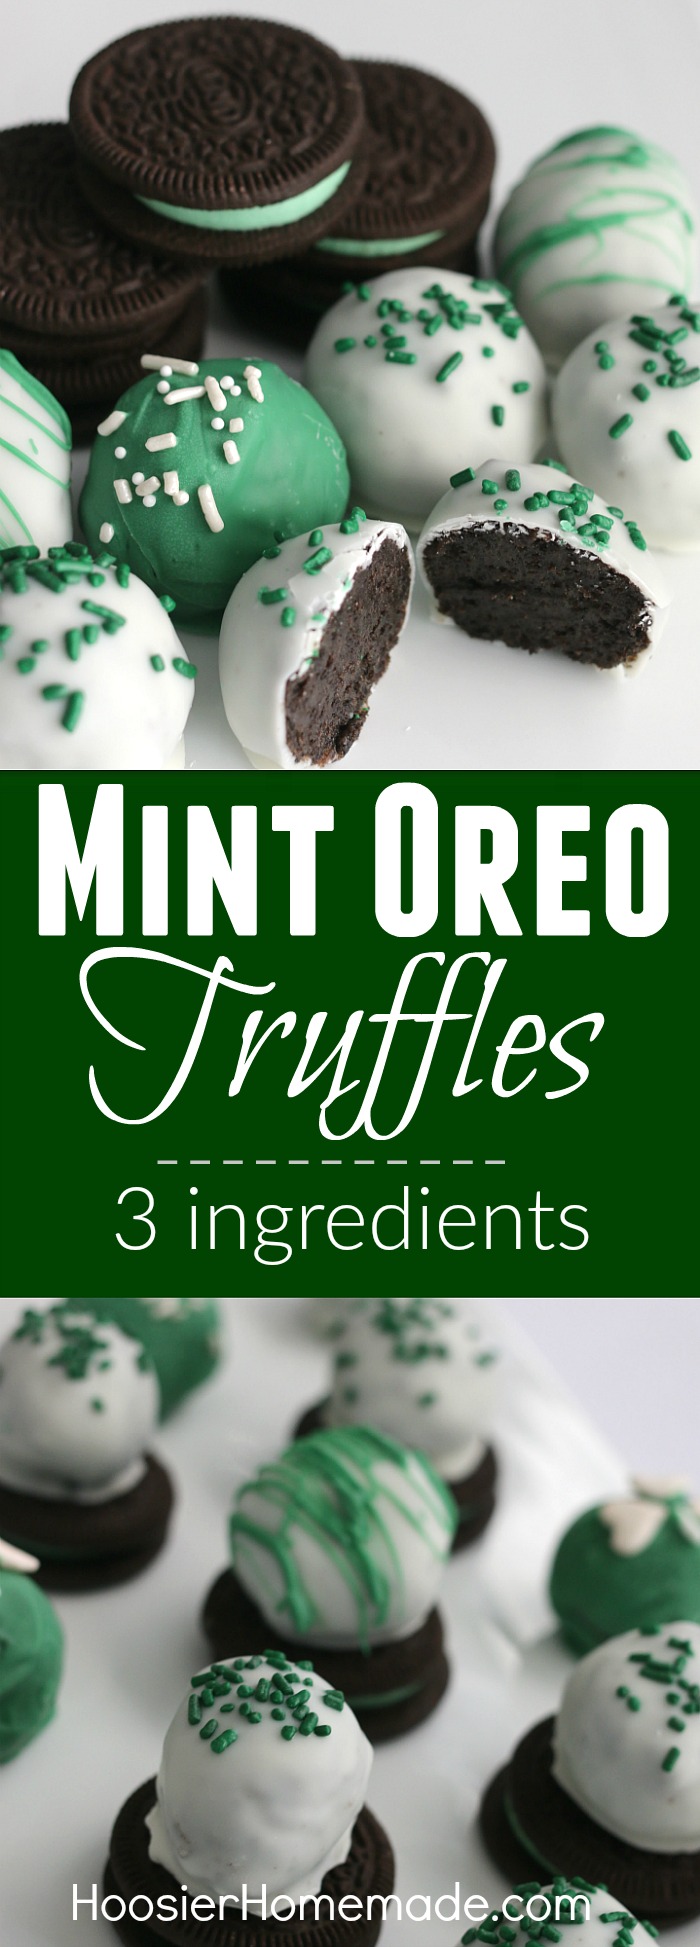 Mint Oreo Truffles - ONLY 3 ingredients is all you need for these delicious St. Patrick's Day treats! The kids will have a blast crushing the Oreos, and helping form the balls. Dip in chocolate coating, add sprinkles and you have a fun treat!